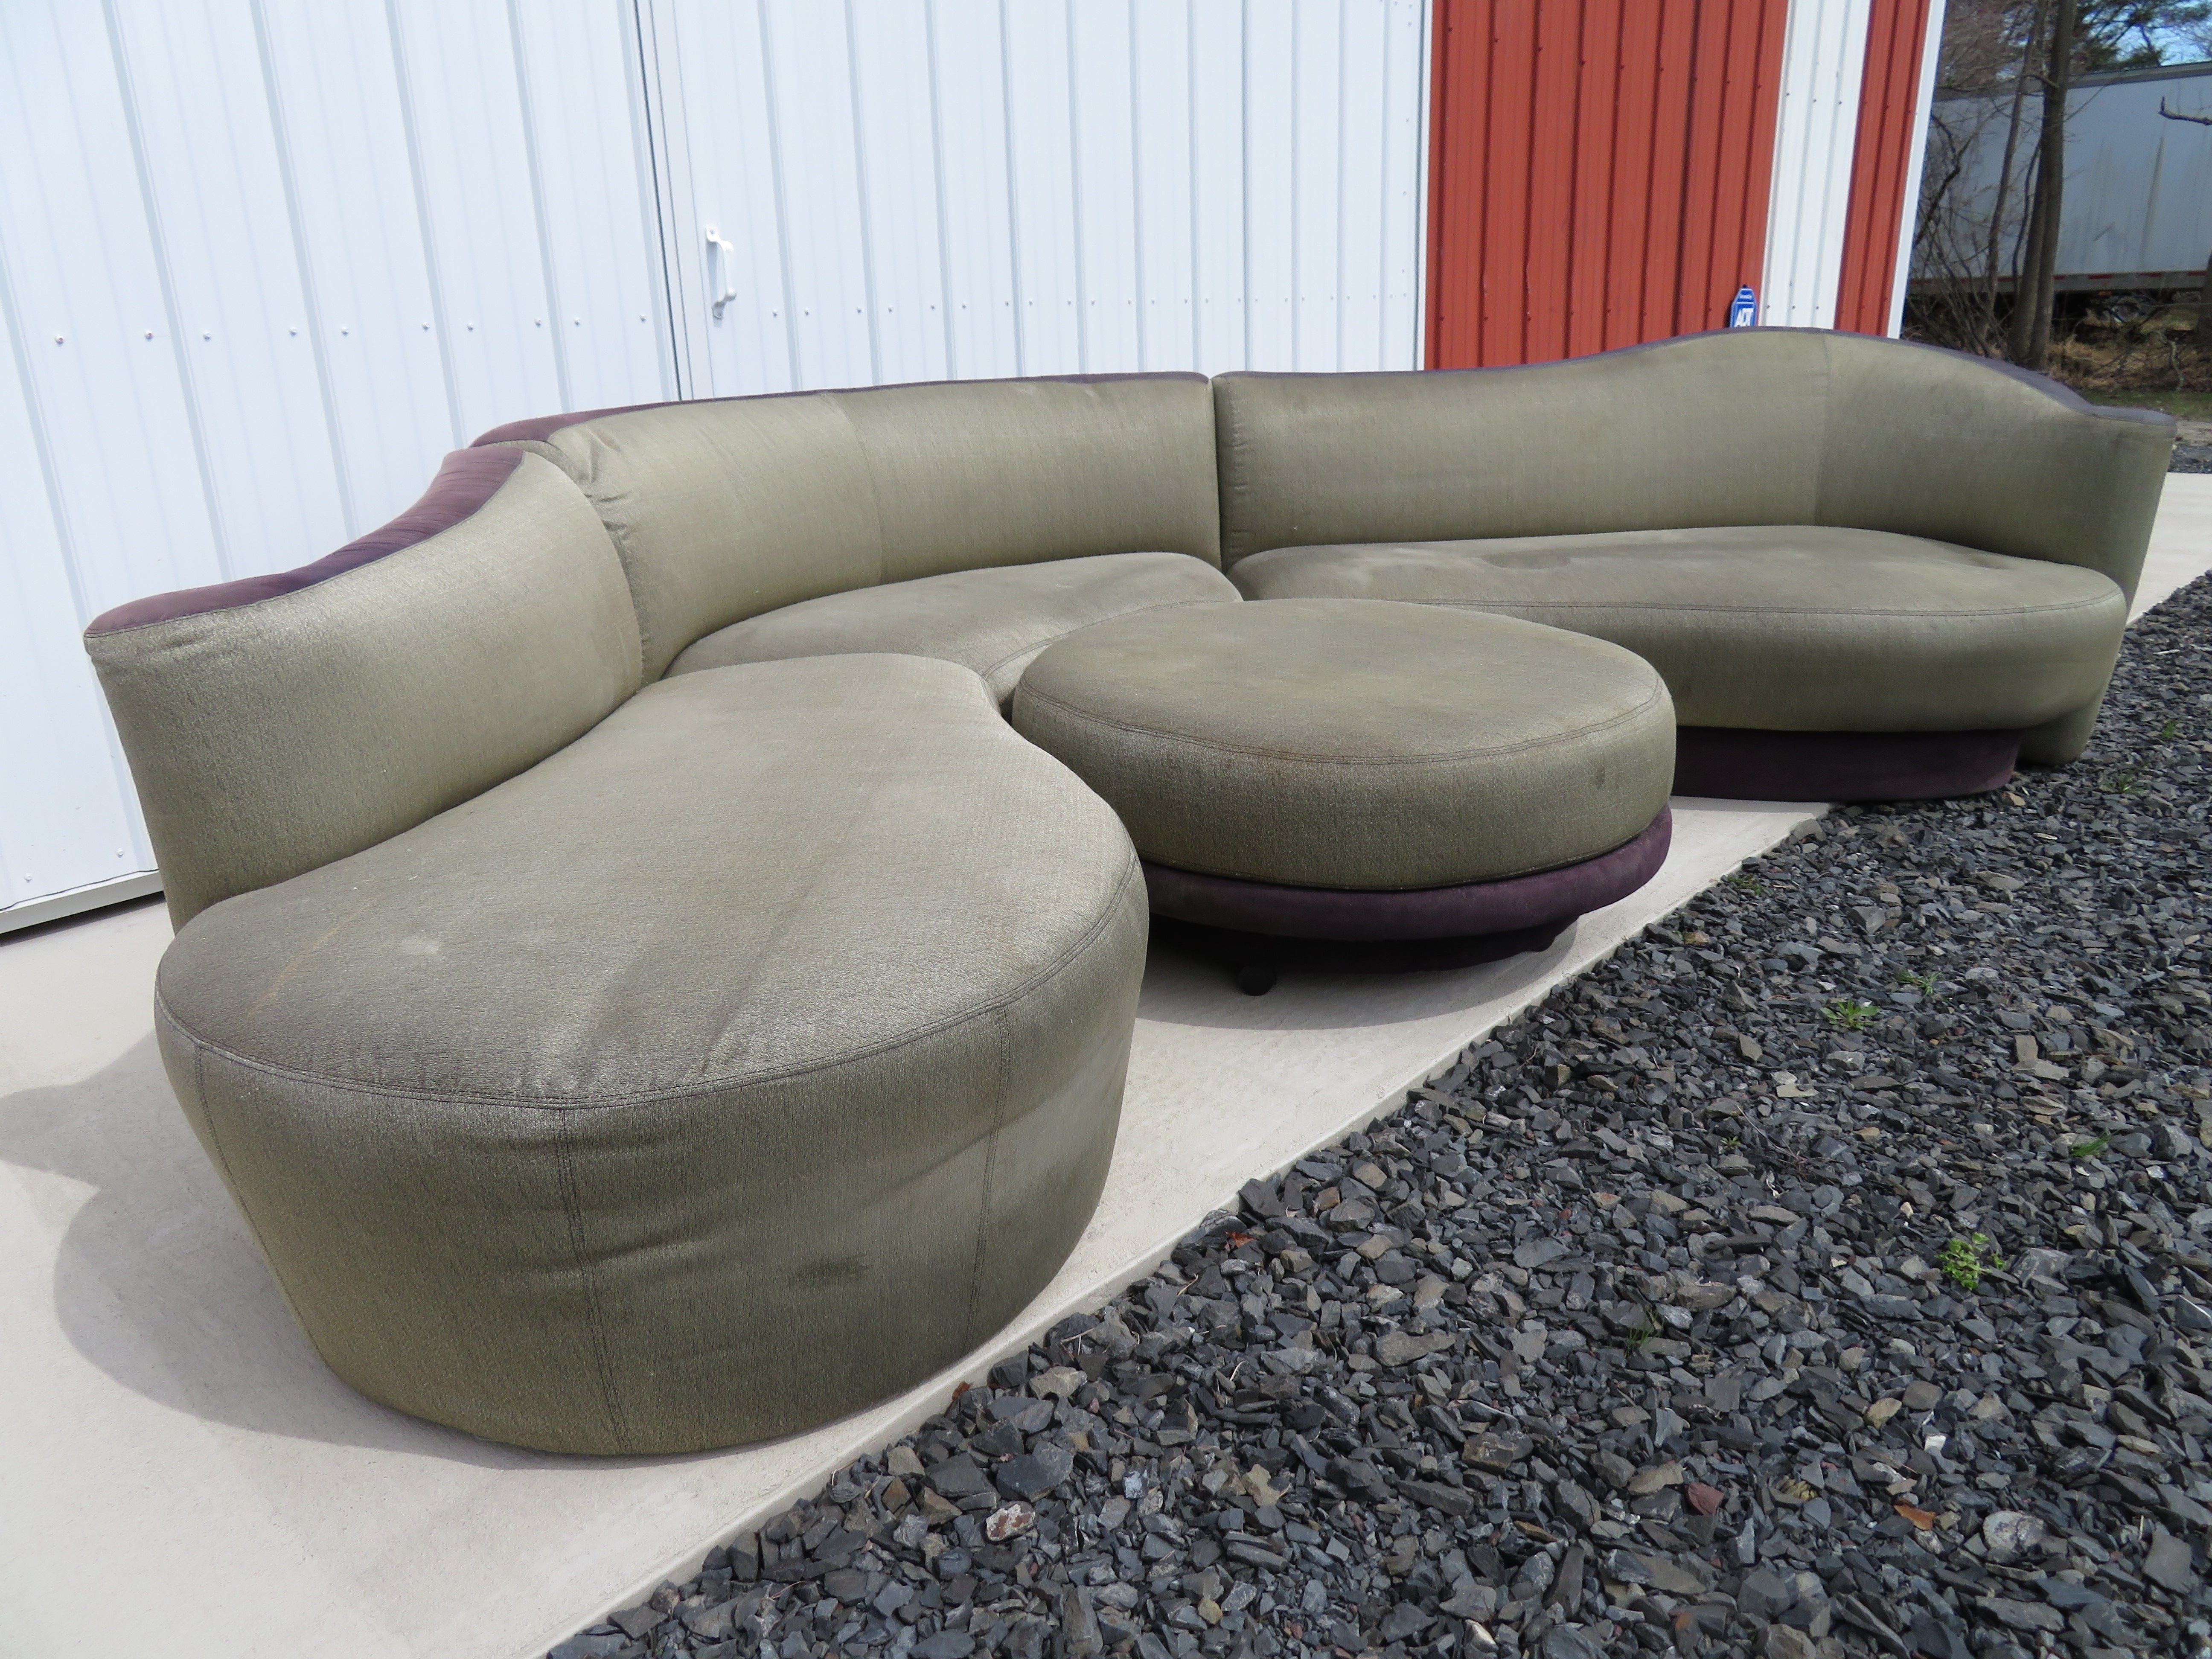 Scrumptious 4-piece serpentine sectional sofa designed by Robert Ebel, made by Weiman. We just love all the sweeping curves and the rolling round ottoman this sectional sofa includes. This set retains its original fabric and will need to be